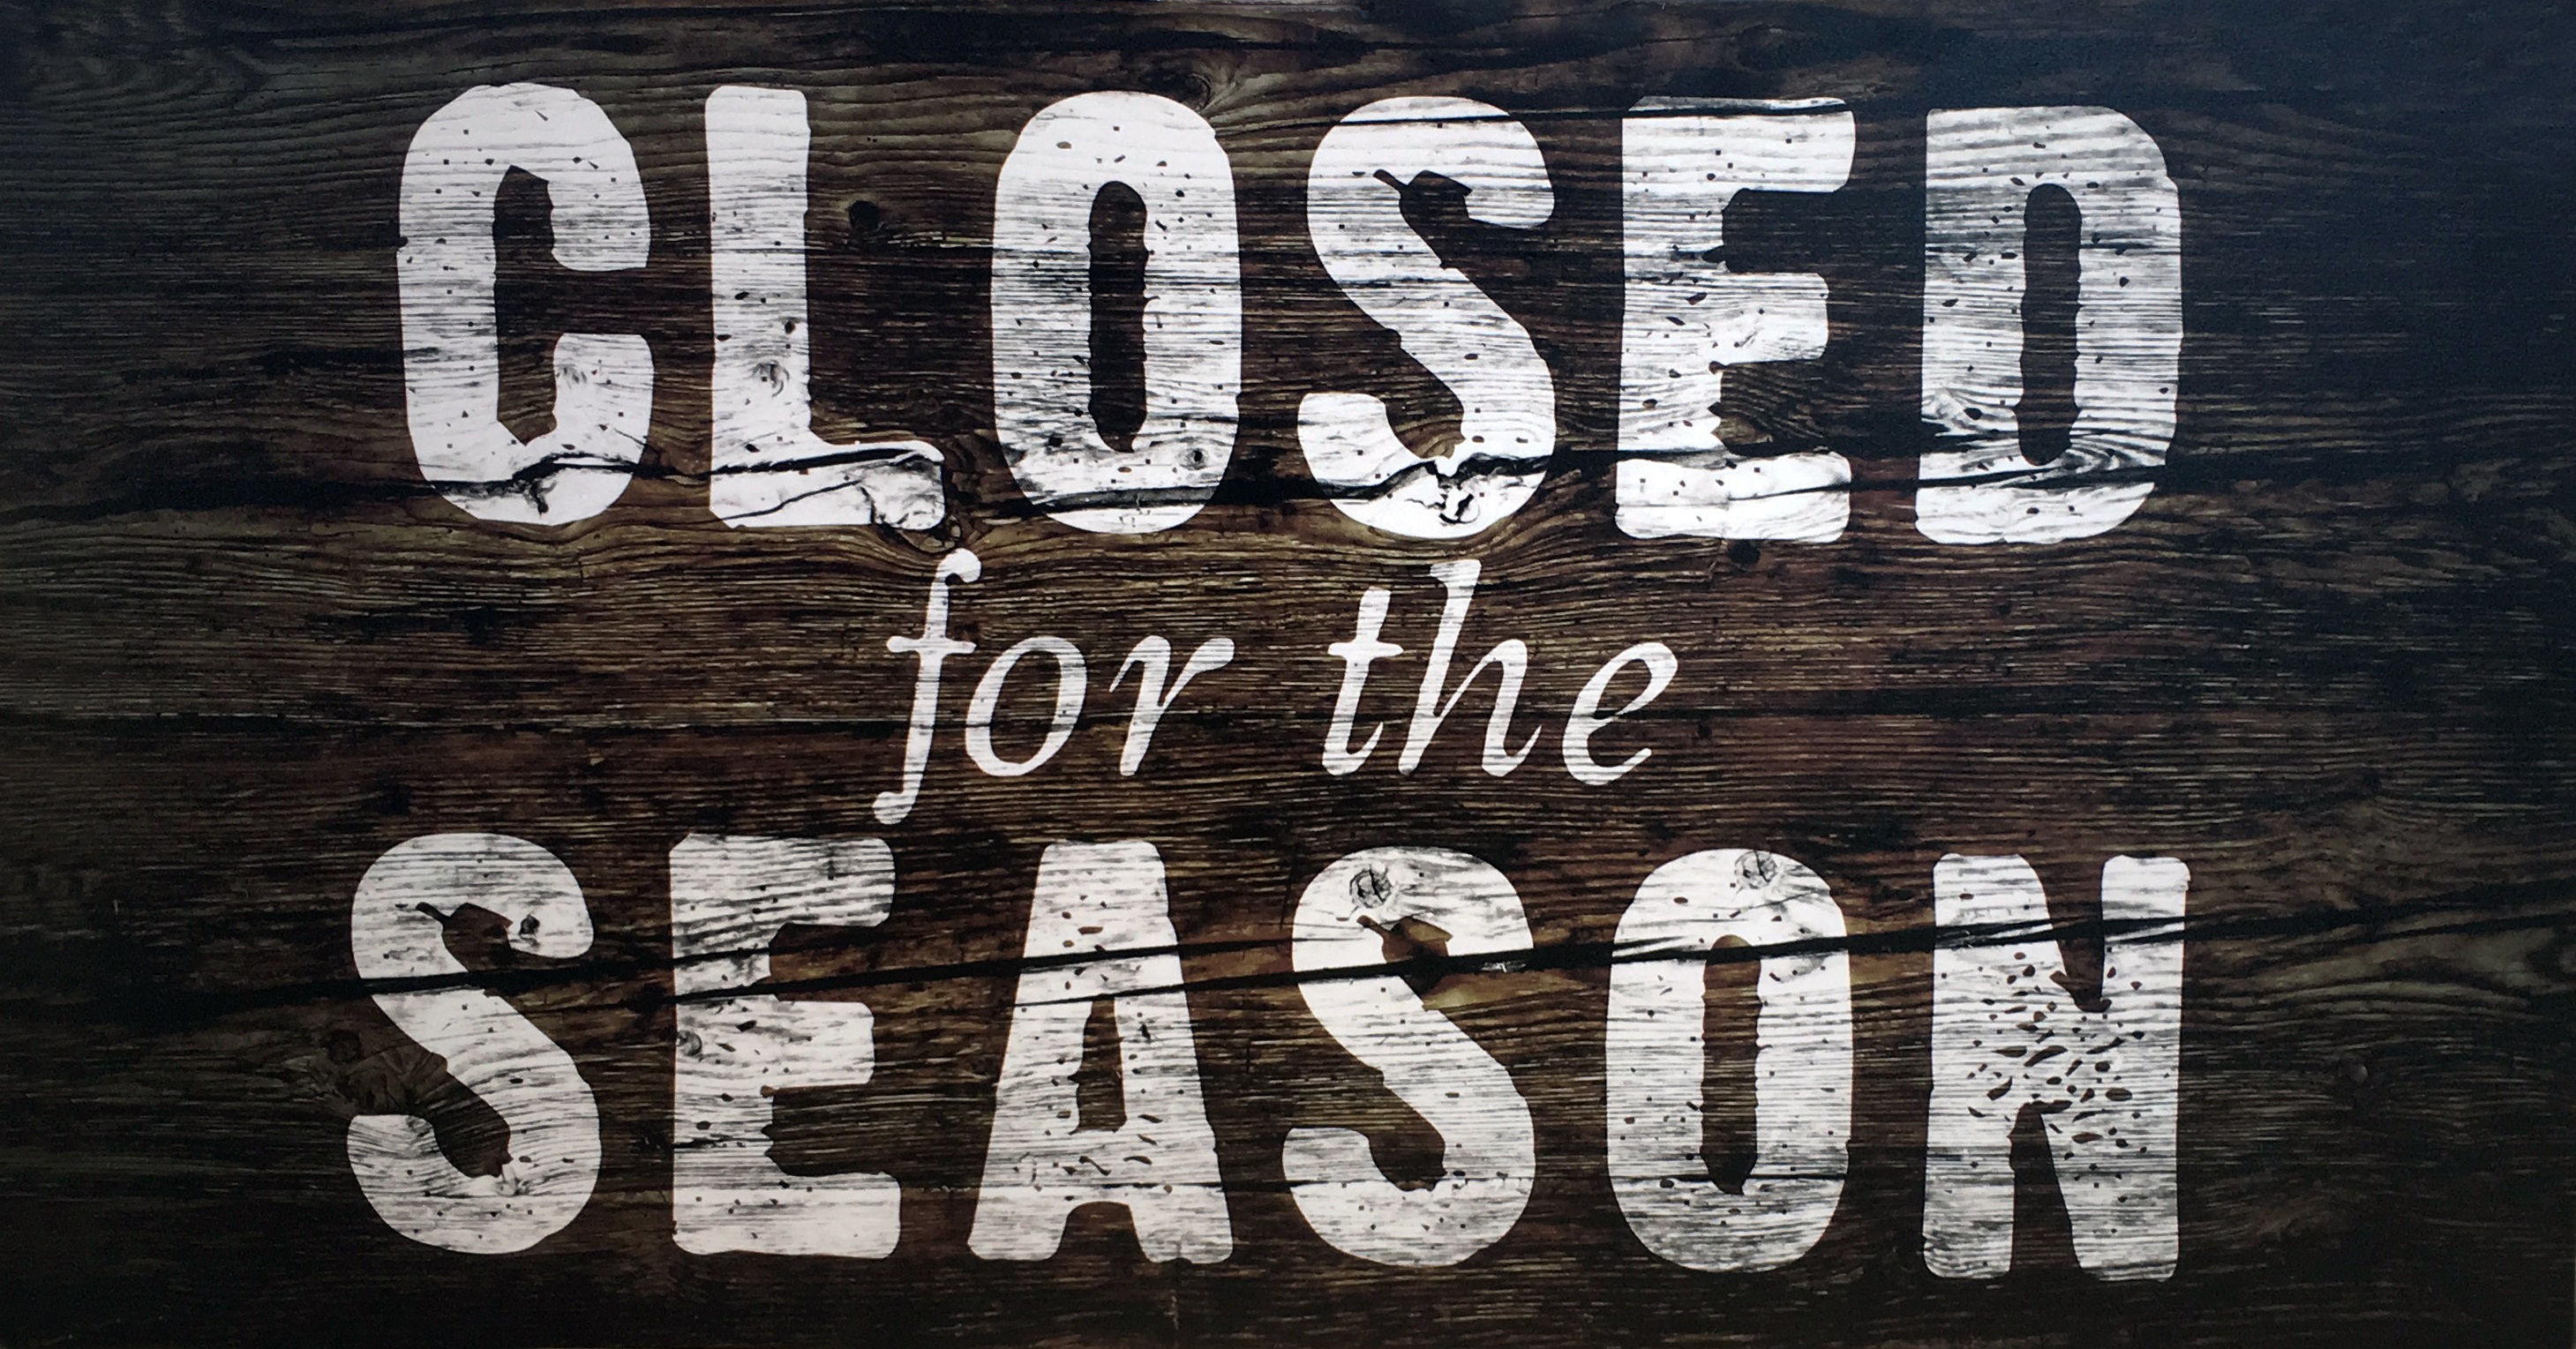 'Closed for the Season' is written in white paint against a wooden sign.